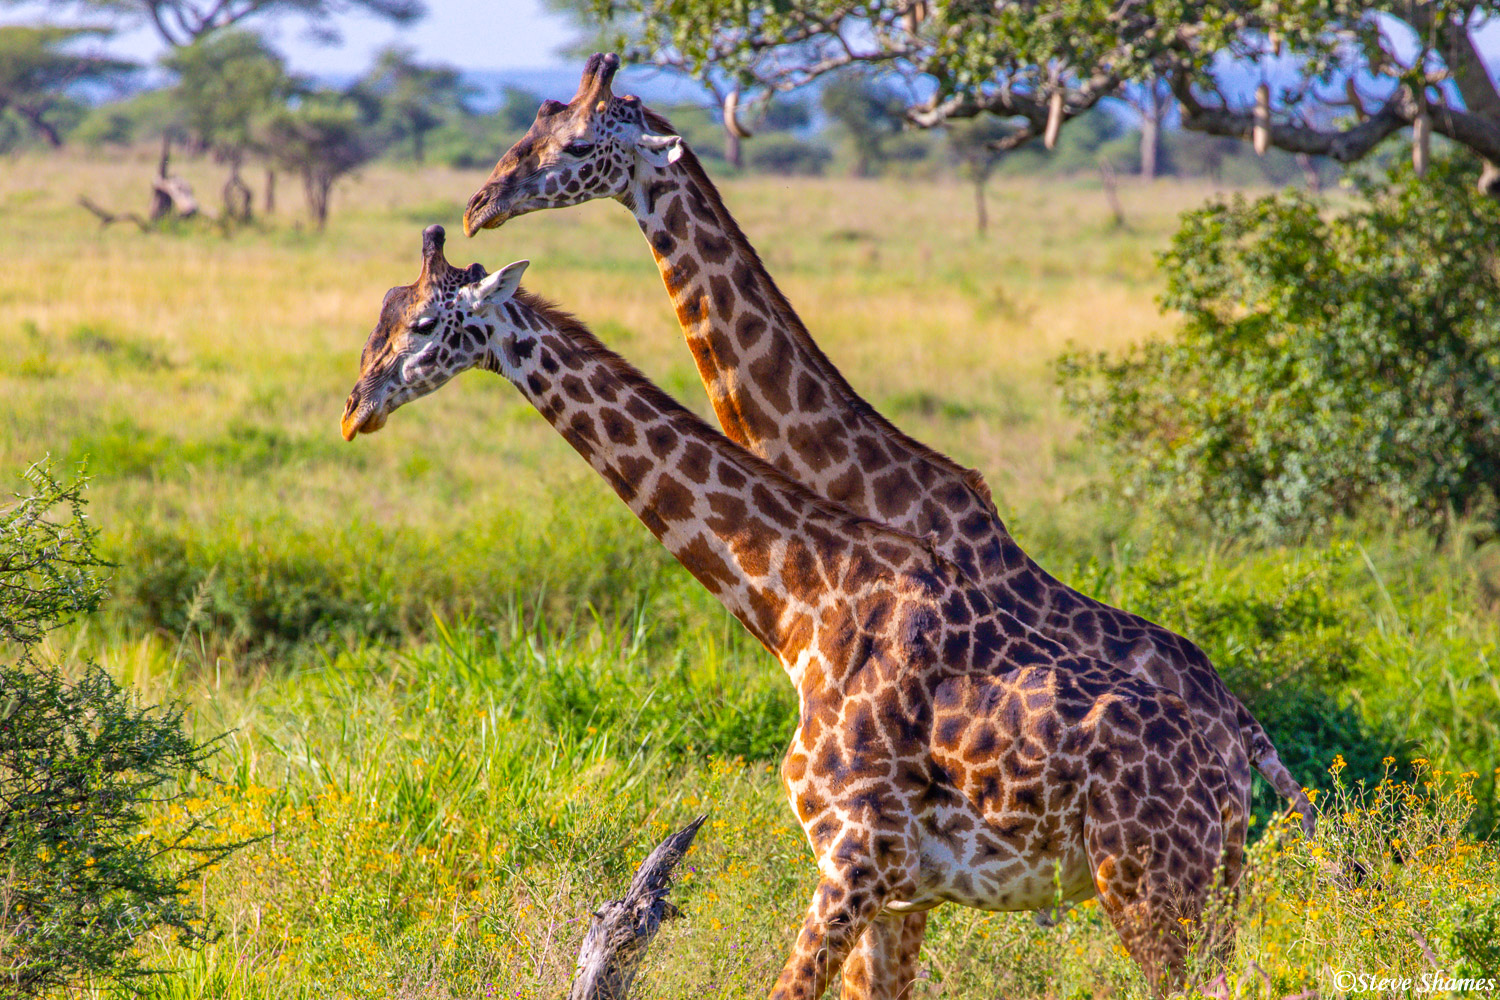 Two long necked giraffes posing like they are one animal.